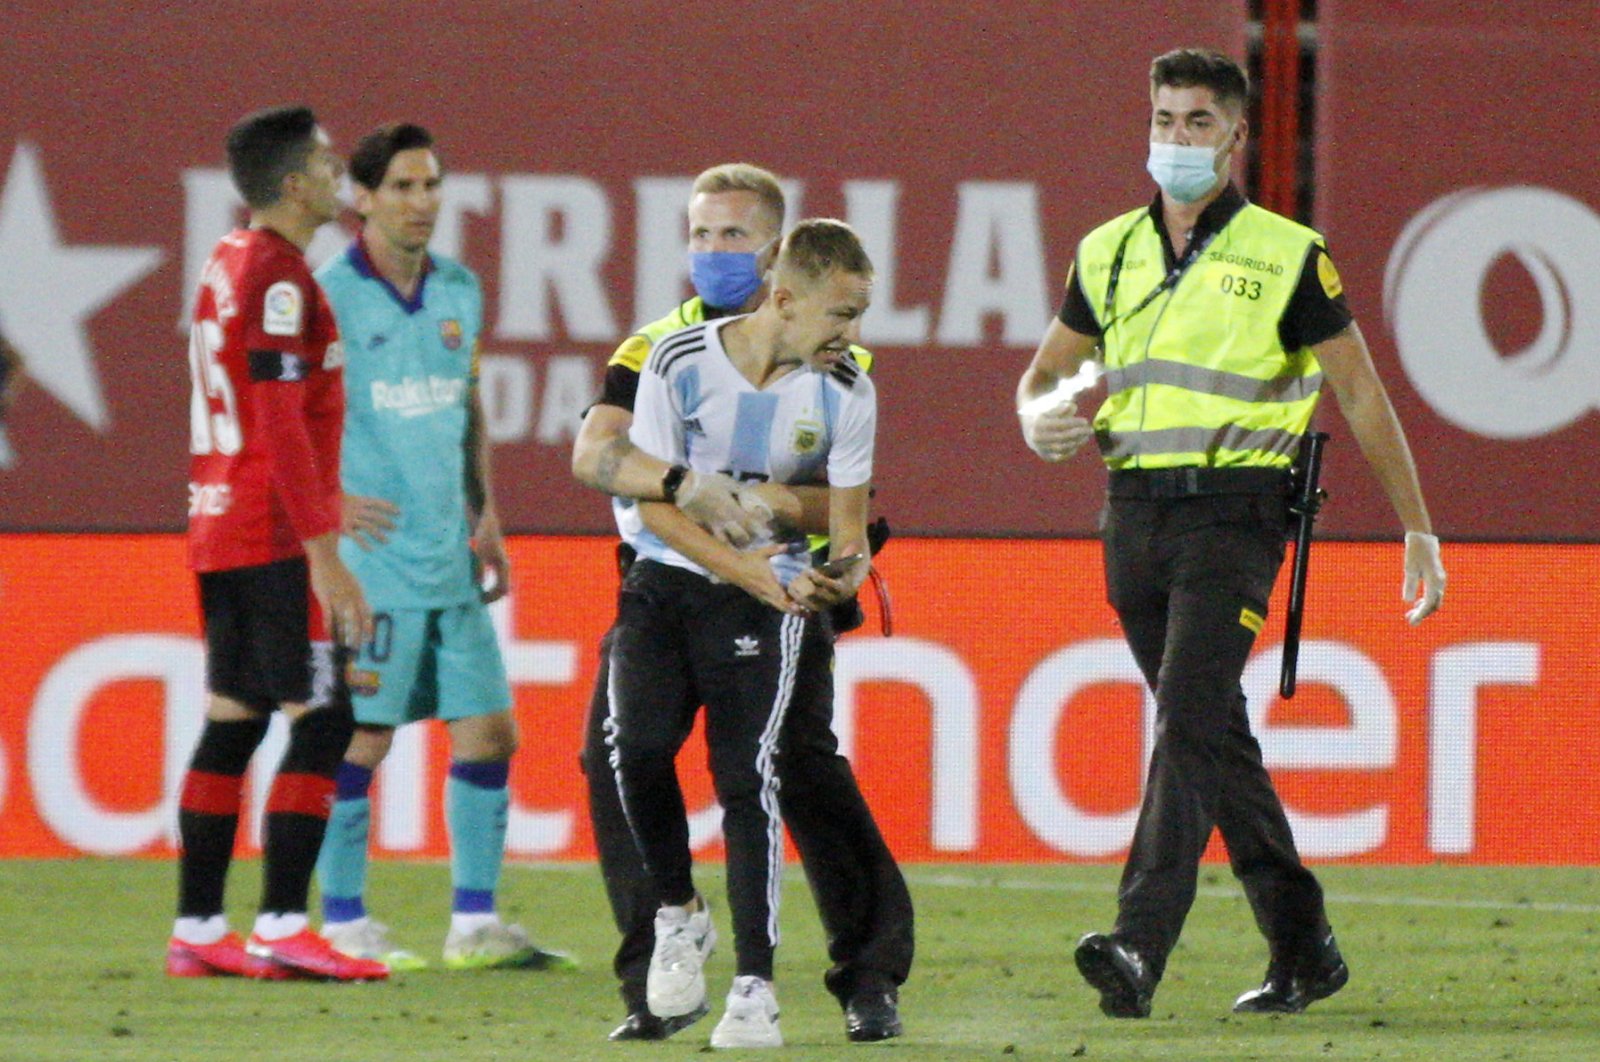 The fan was stopped by security forces, Mallorca, Spain, June 13, 2020. (AP Photo)